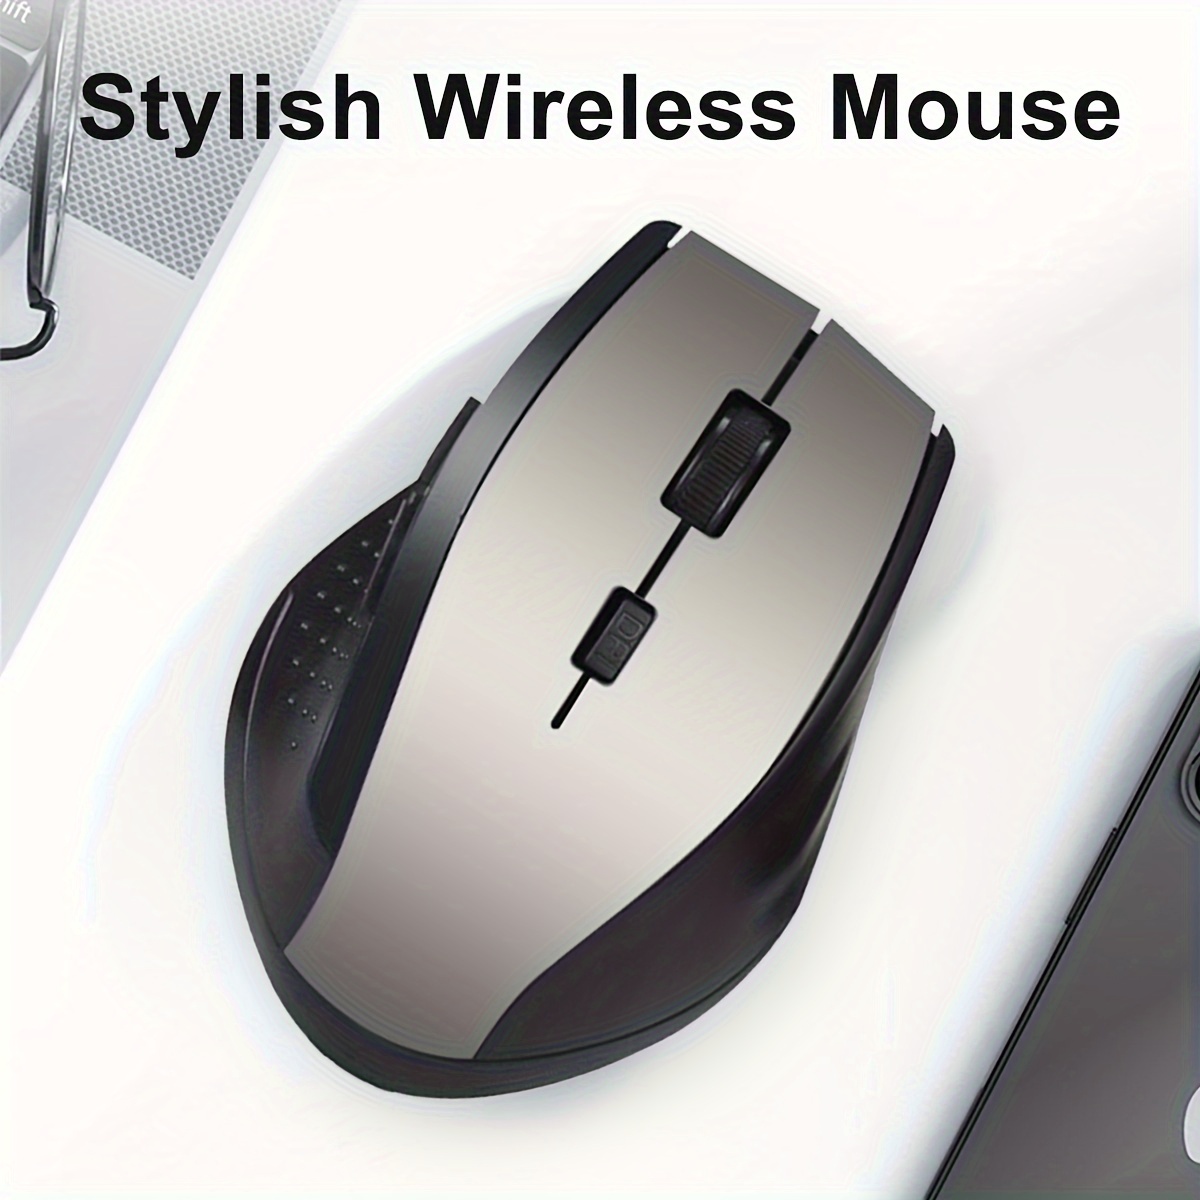 

2.4ghz Wireless Gaming Mouse With Usb Receiver - Compatible With Pc & Laptop, Supports Windows 7/2000/xp/vista